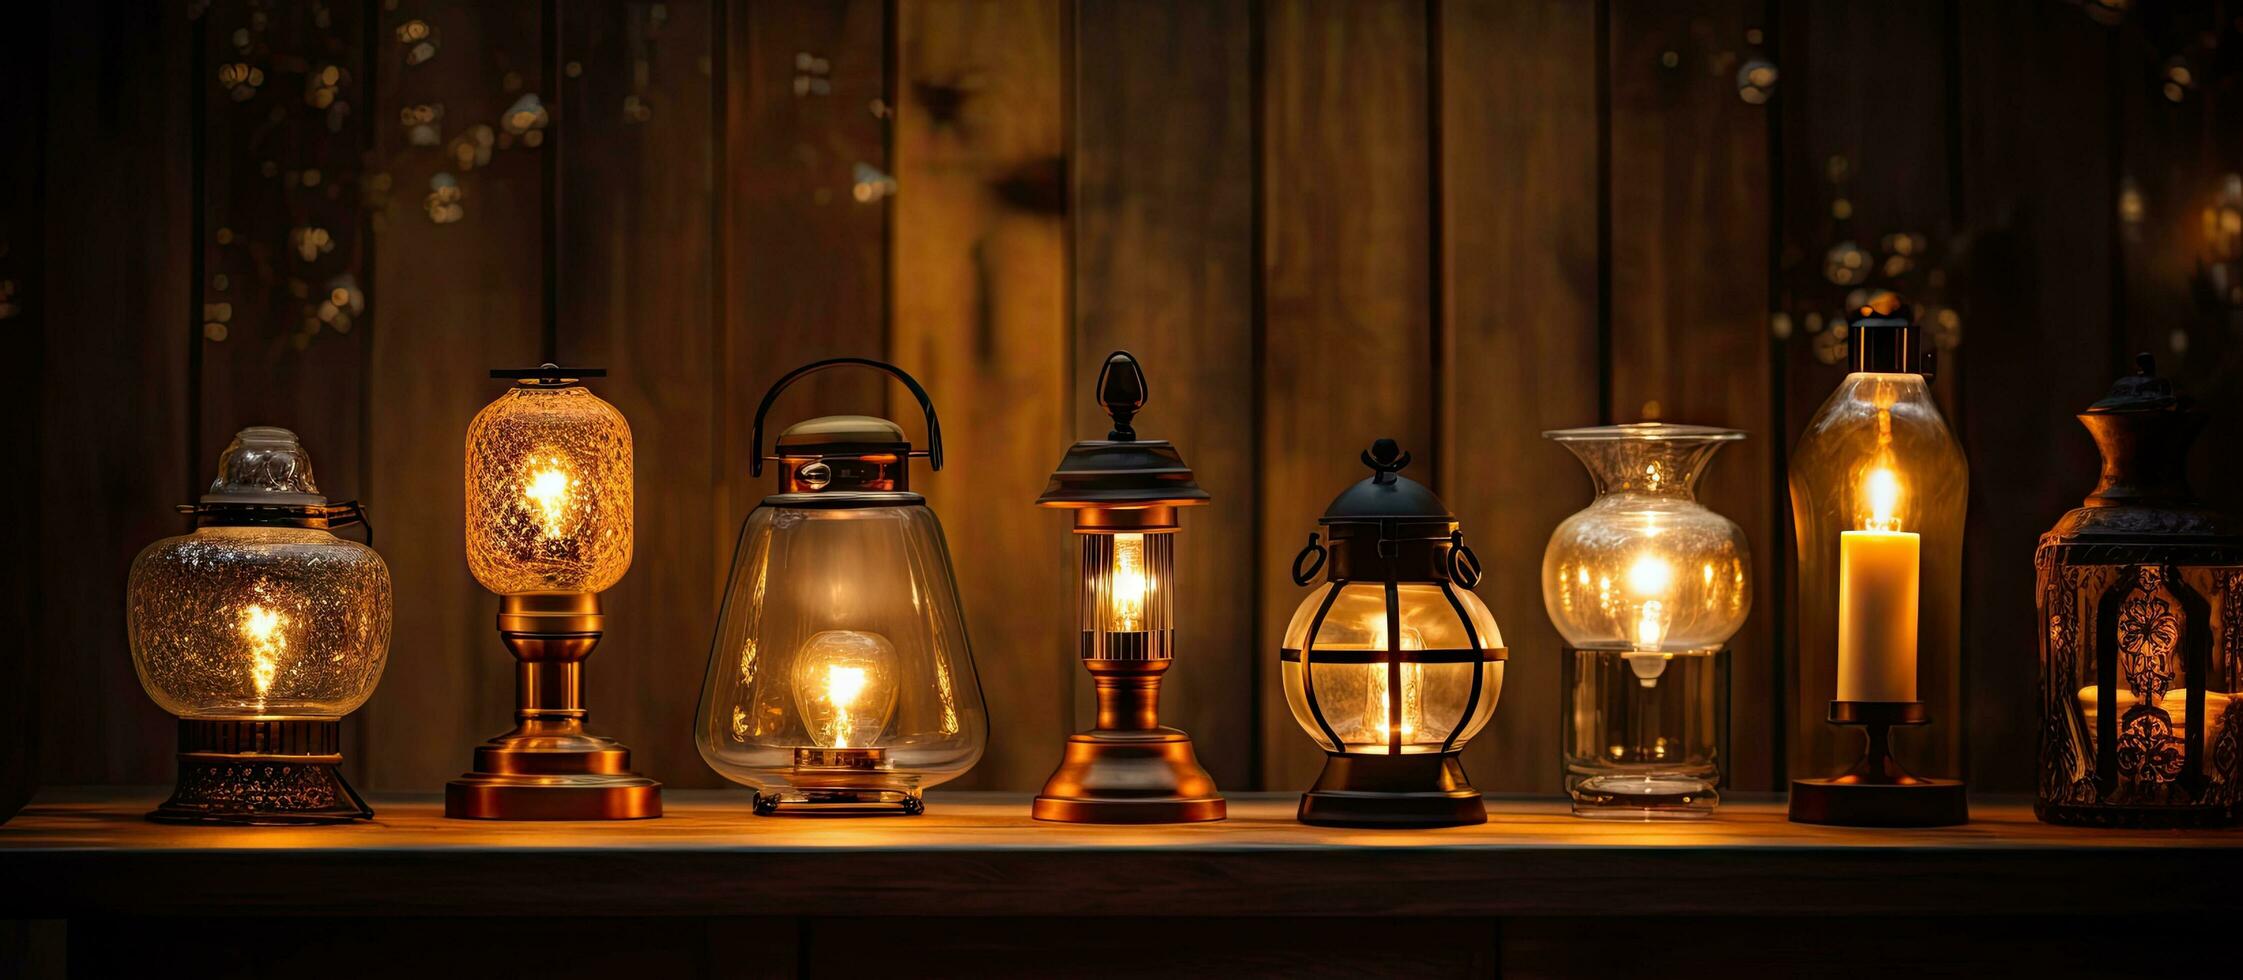 Vintage lamps providing ambient lighting in a cozy home setting photo